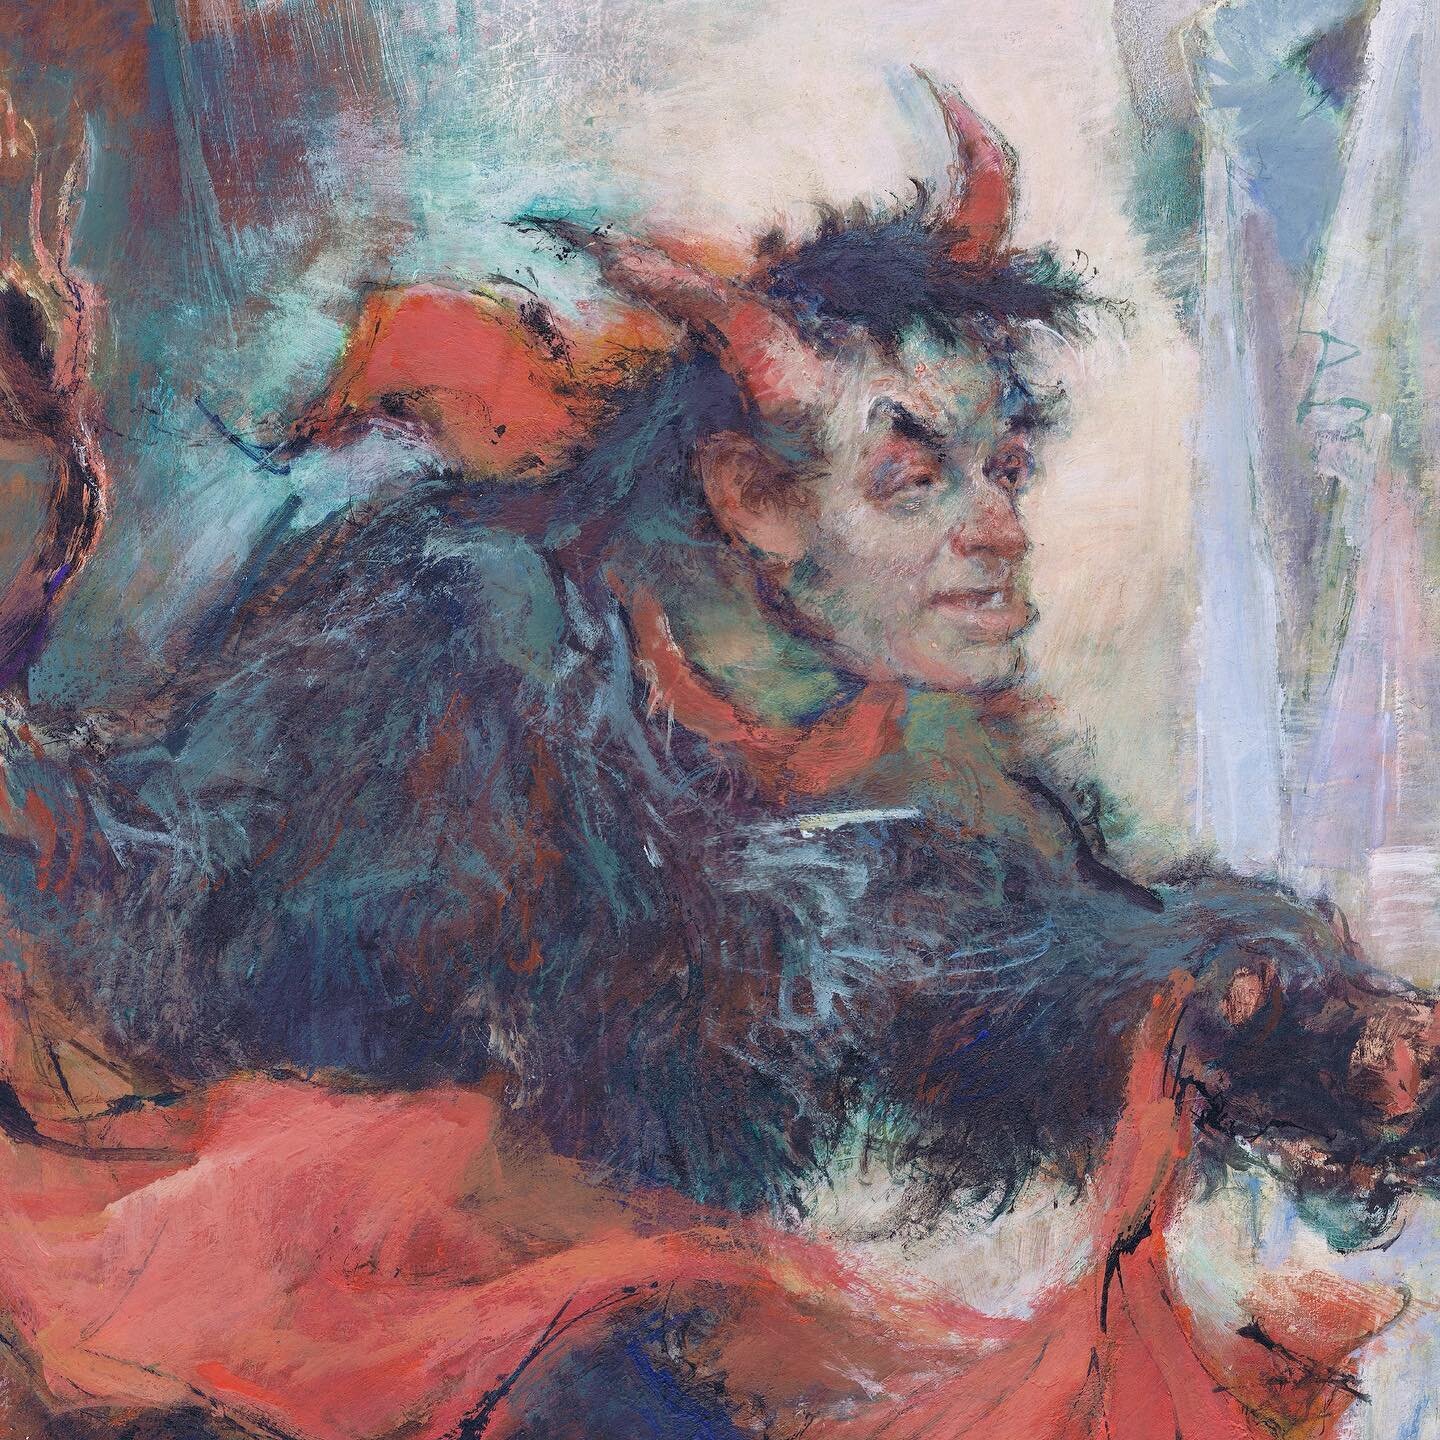 The Devil in &lsquo;Jedermann&rsquo; ca 1962.
.
As a regular visitor of the Salzburg Festival, Hans Liska was fascinated with his friend Ernst Ginsberg&rsquo;s performance as the devil in the play &lsquo;Jedermann&rsquo;. @hans.liska.art sketched man